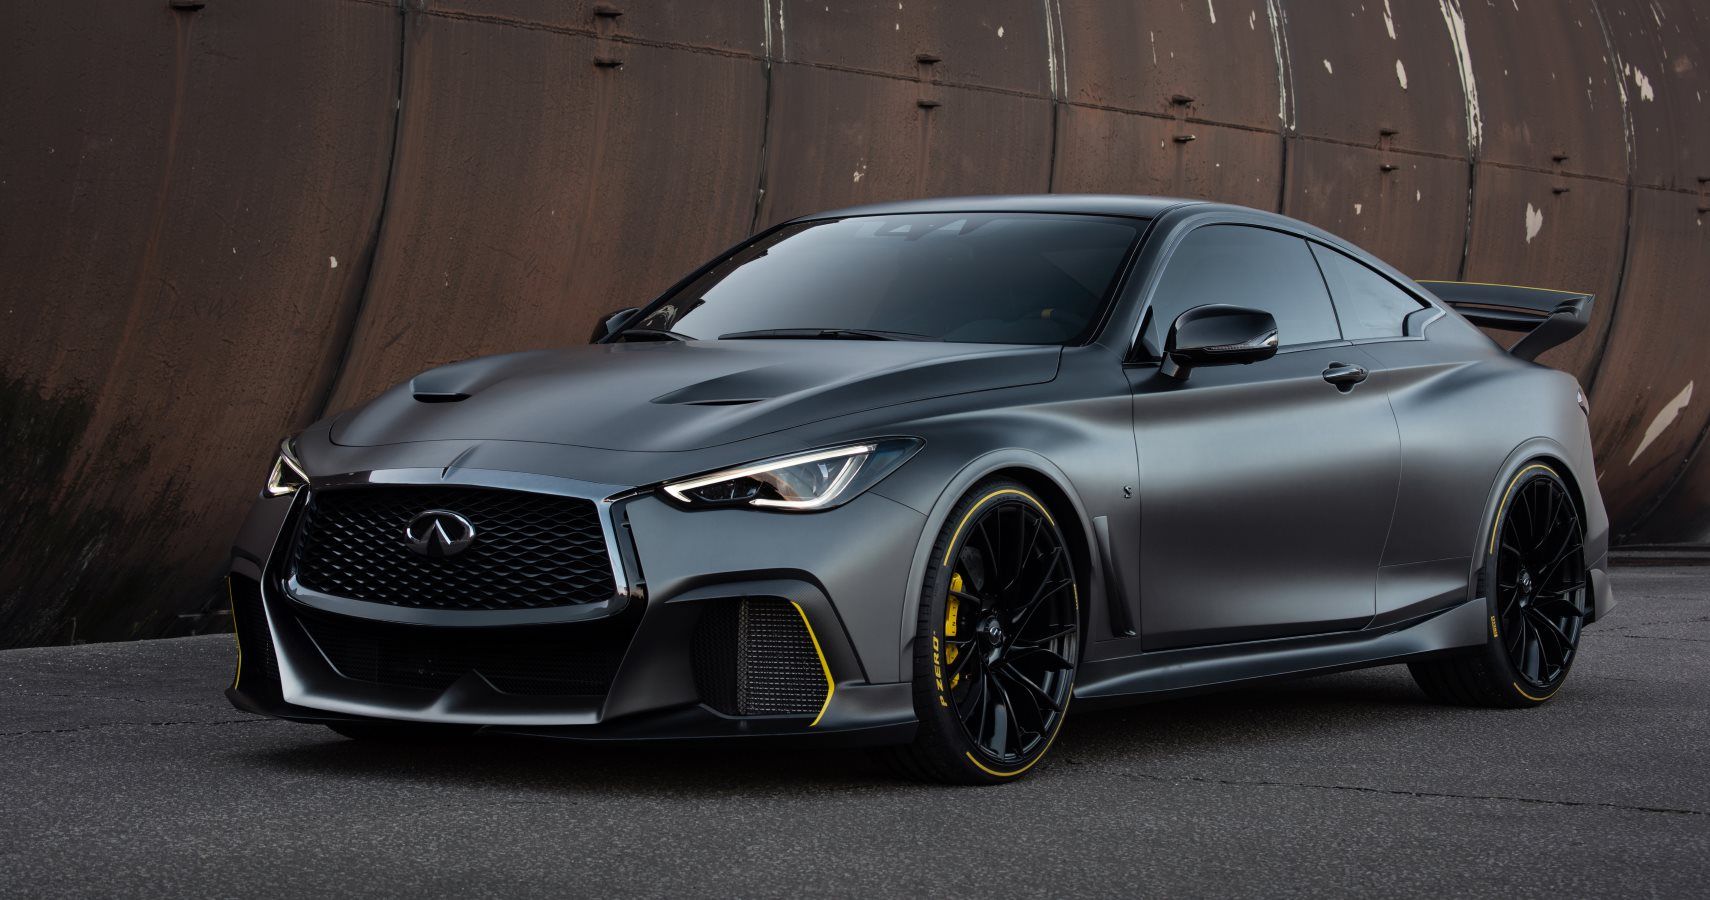 Infiniti Reveals Crazy-Powerful F1-Inspired Q60 Project Black S Details